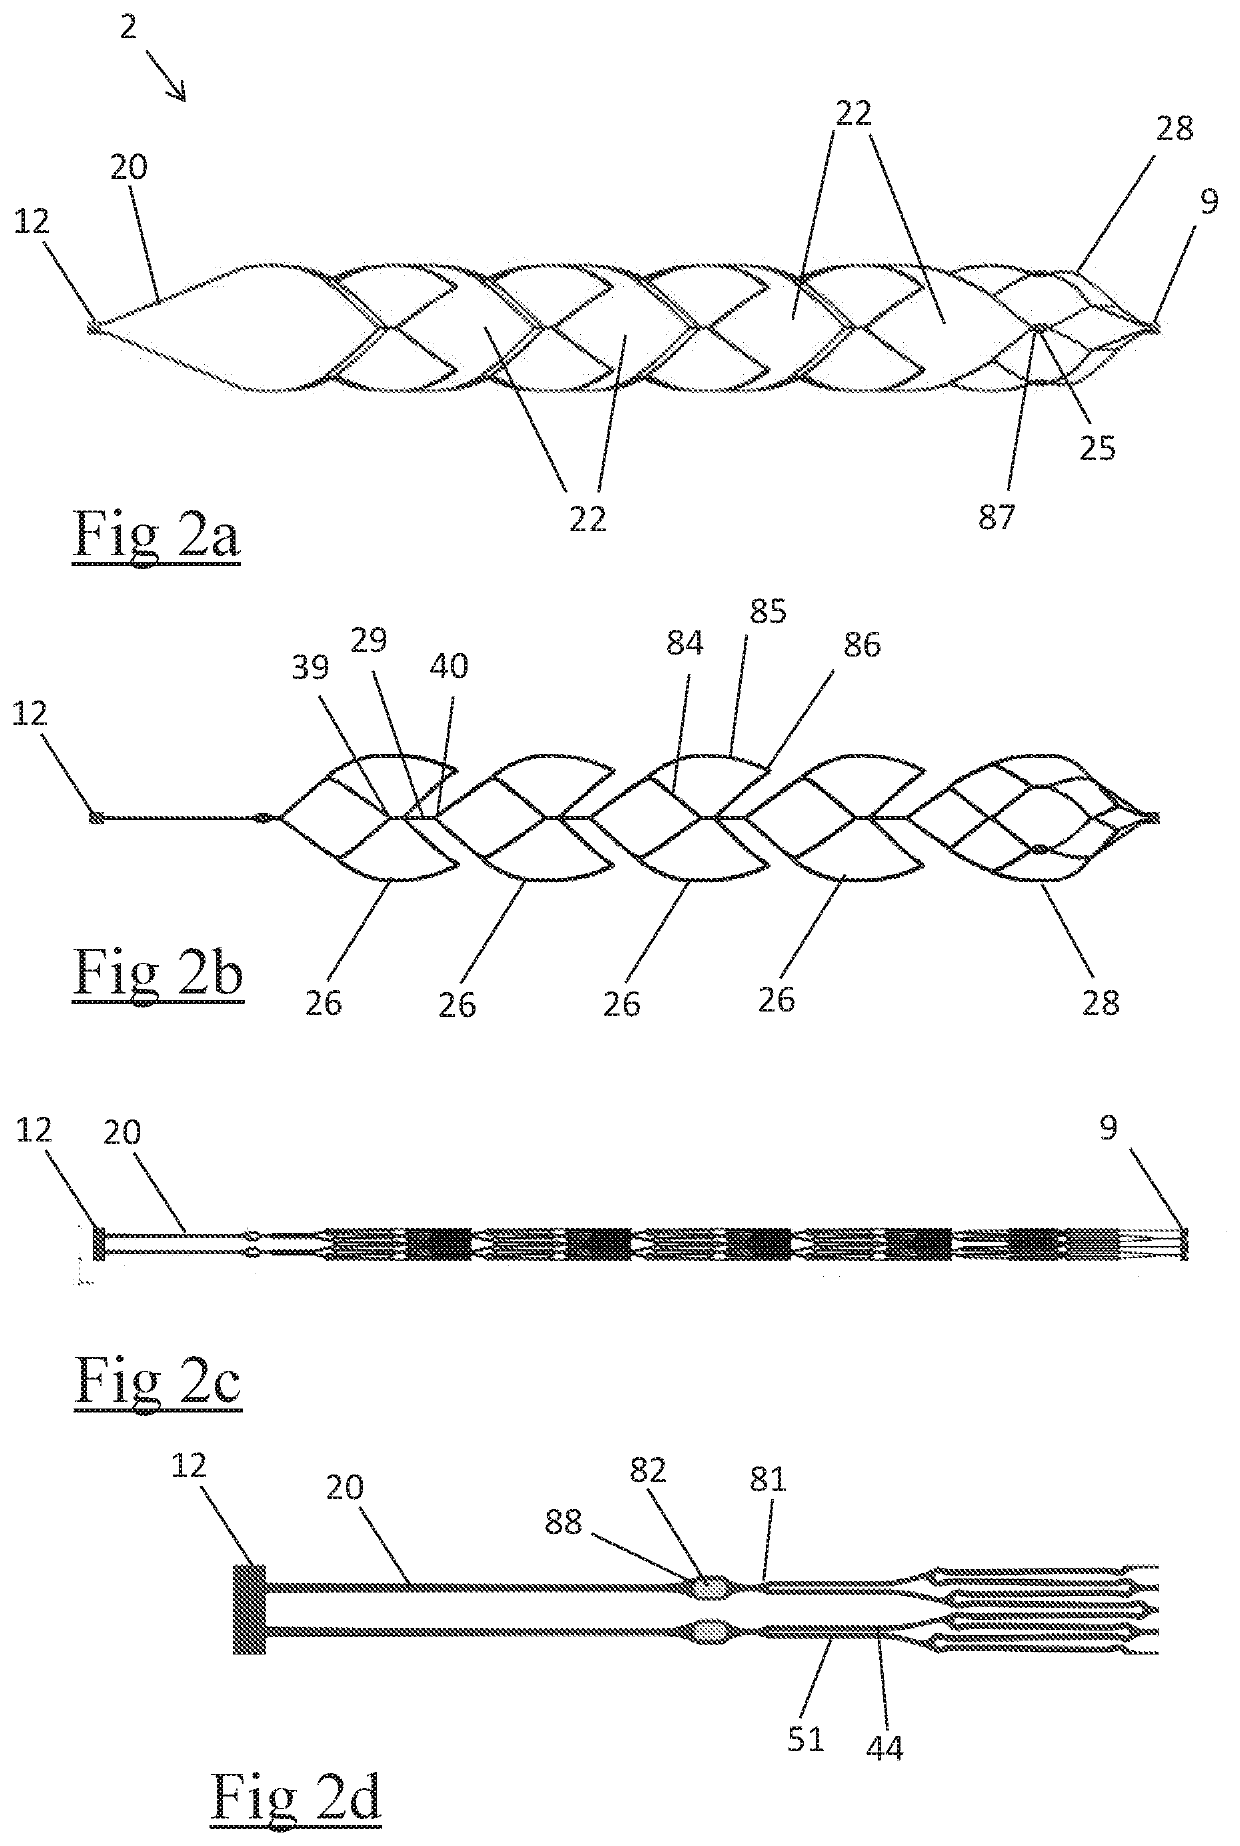 A clot retrieval device for removing occlusive clot from a blood vessel